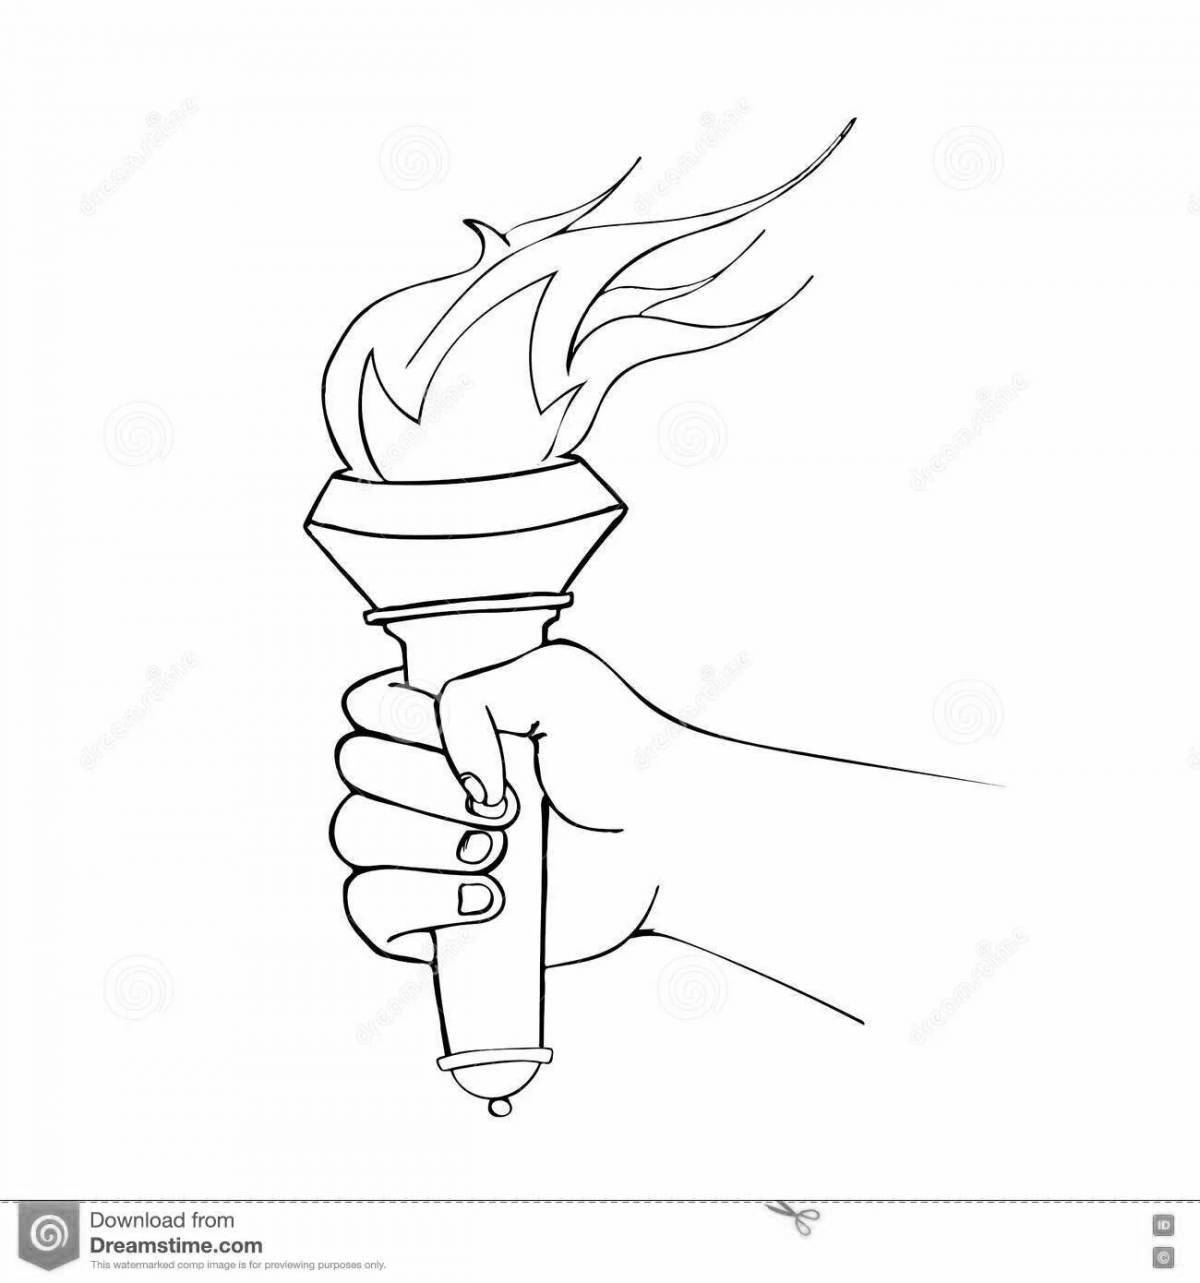 Coloring page of the magnificent Olympic torch